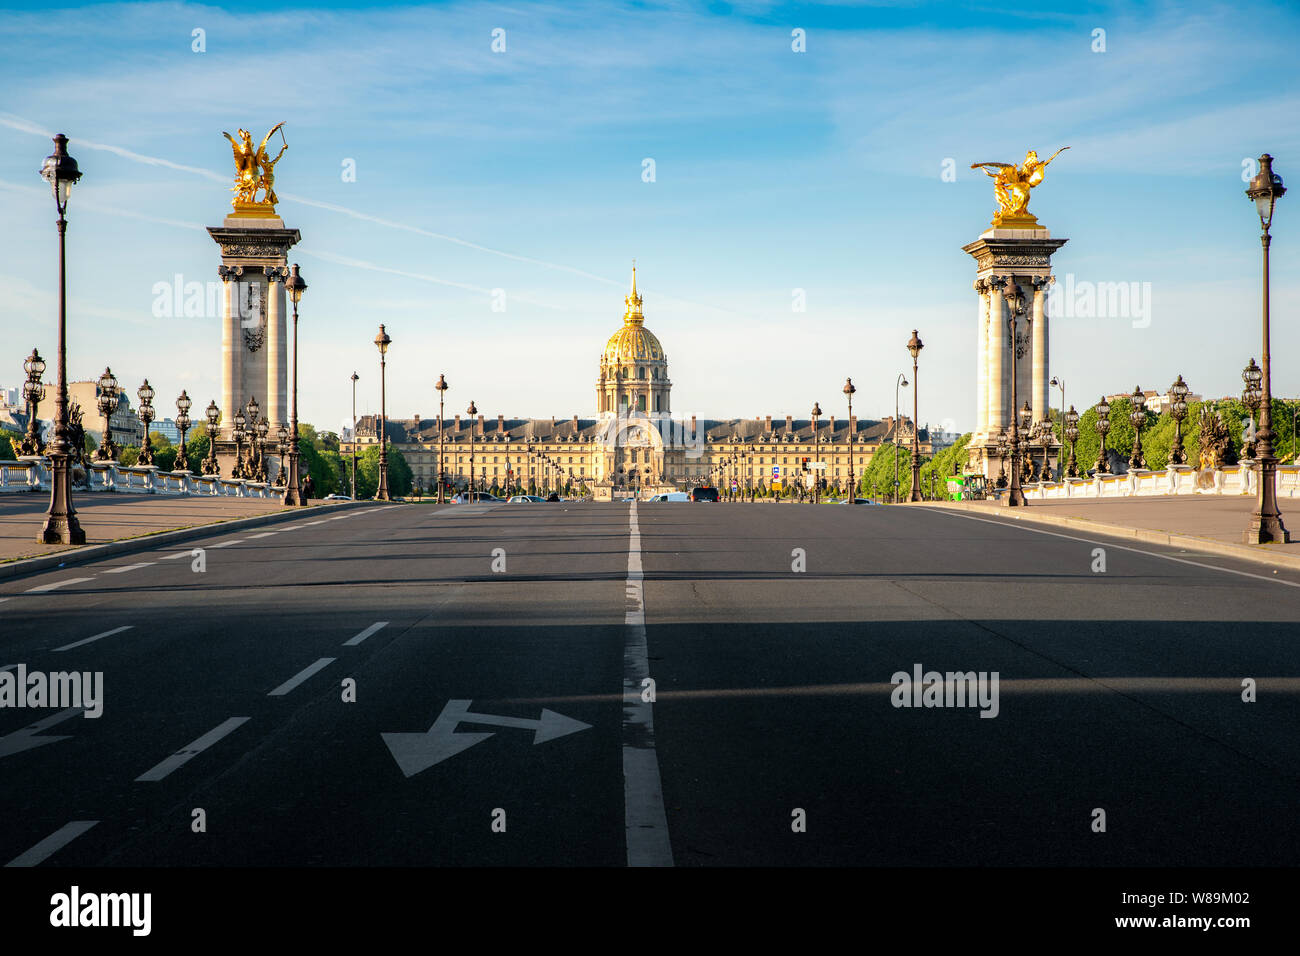 Les Invalides (National Residence of the Invalids) - complex of museums and monuments and Pont Alexandre III bridge in Paris, France. Stock Photo